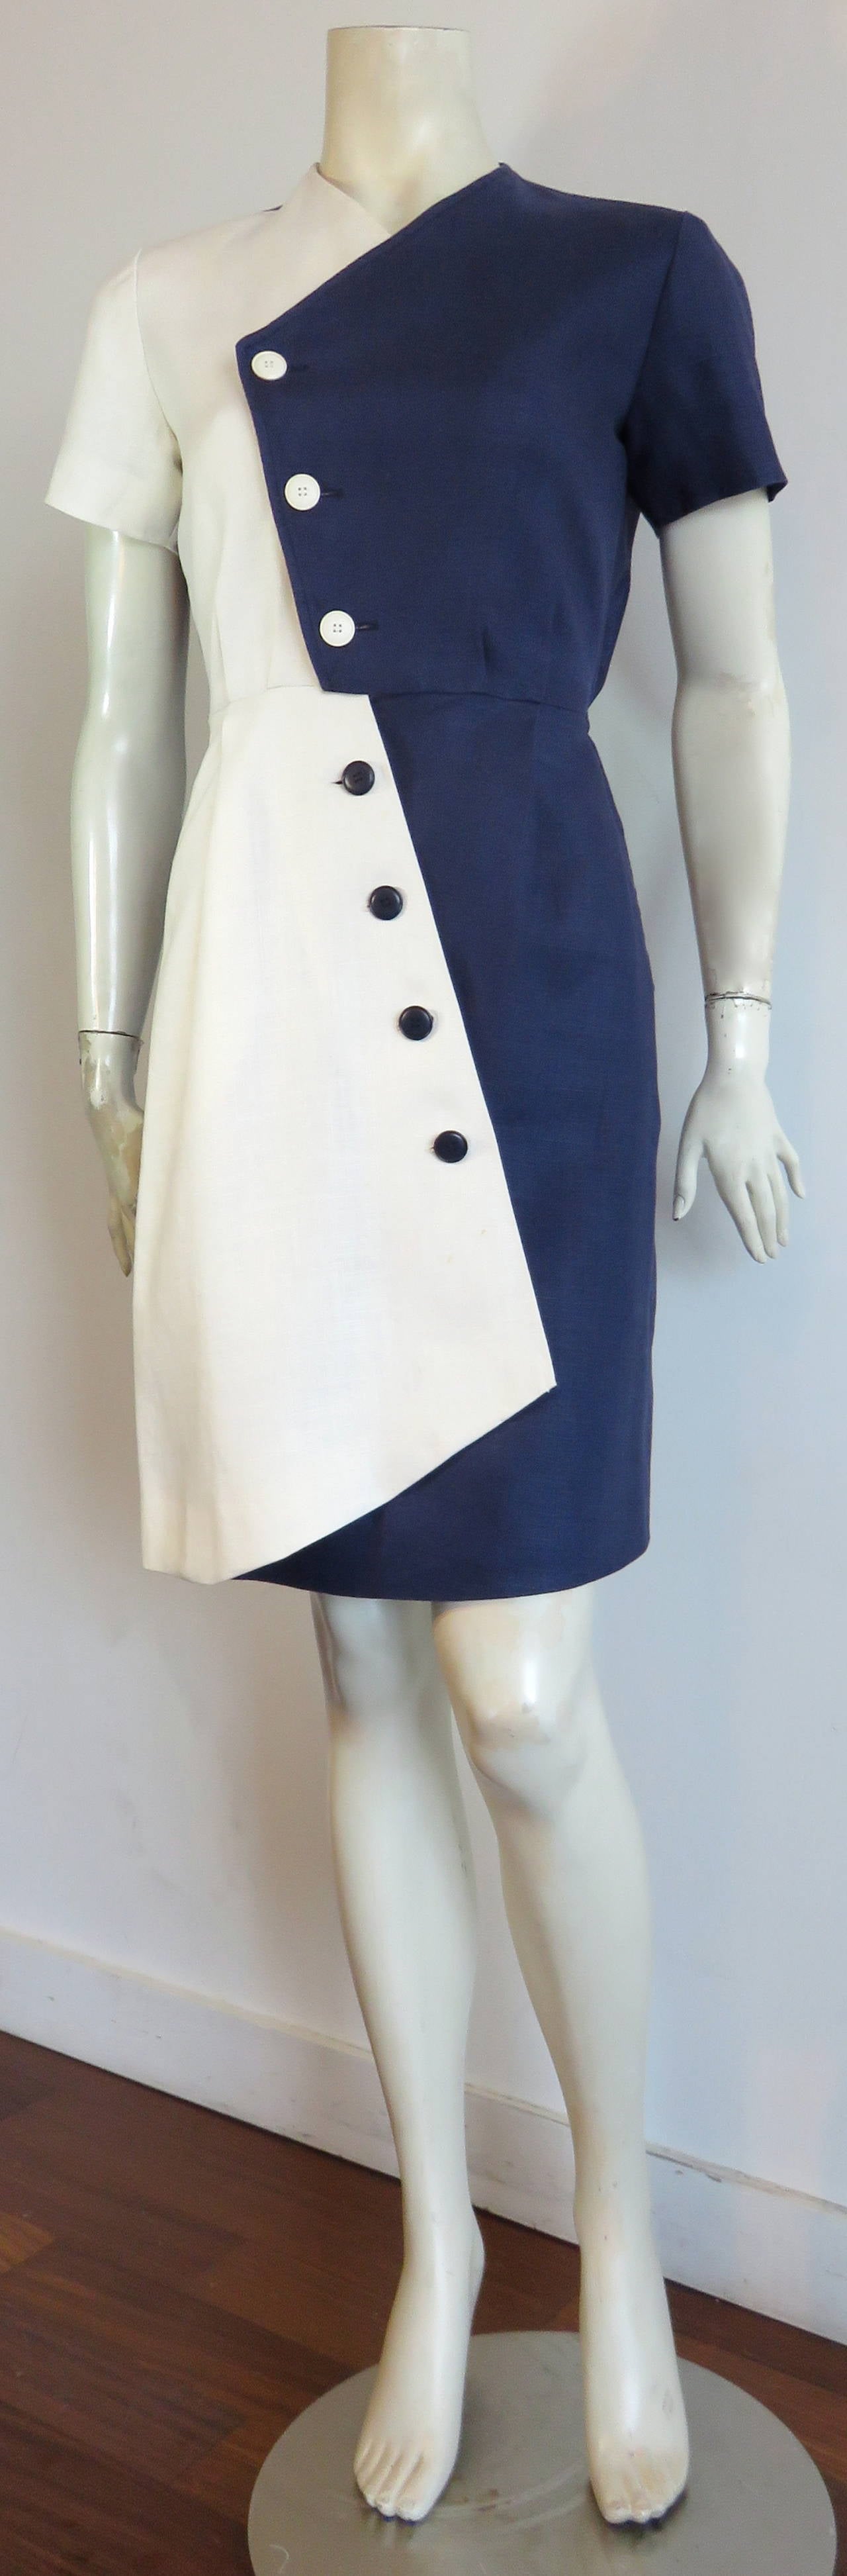 1980's YVES SAINT LAURENT, Cubist style, linen day dress.

Navy blue and white, color-blocked design with angled front placket, and inverse button color placements.

Fully lined dress with concealed side pockets, and internal hook